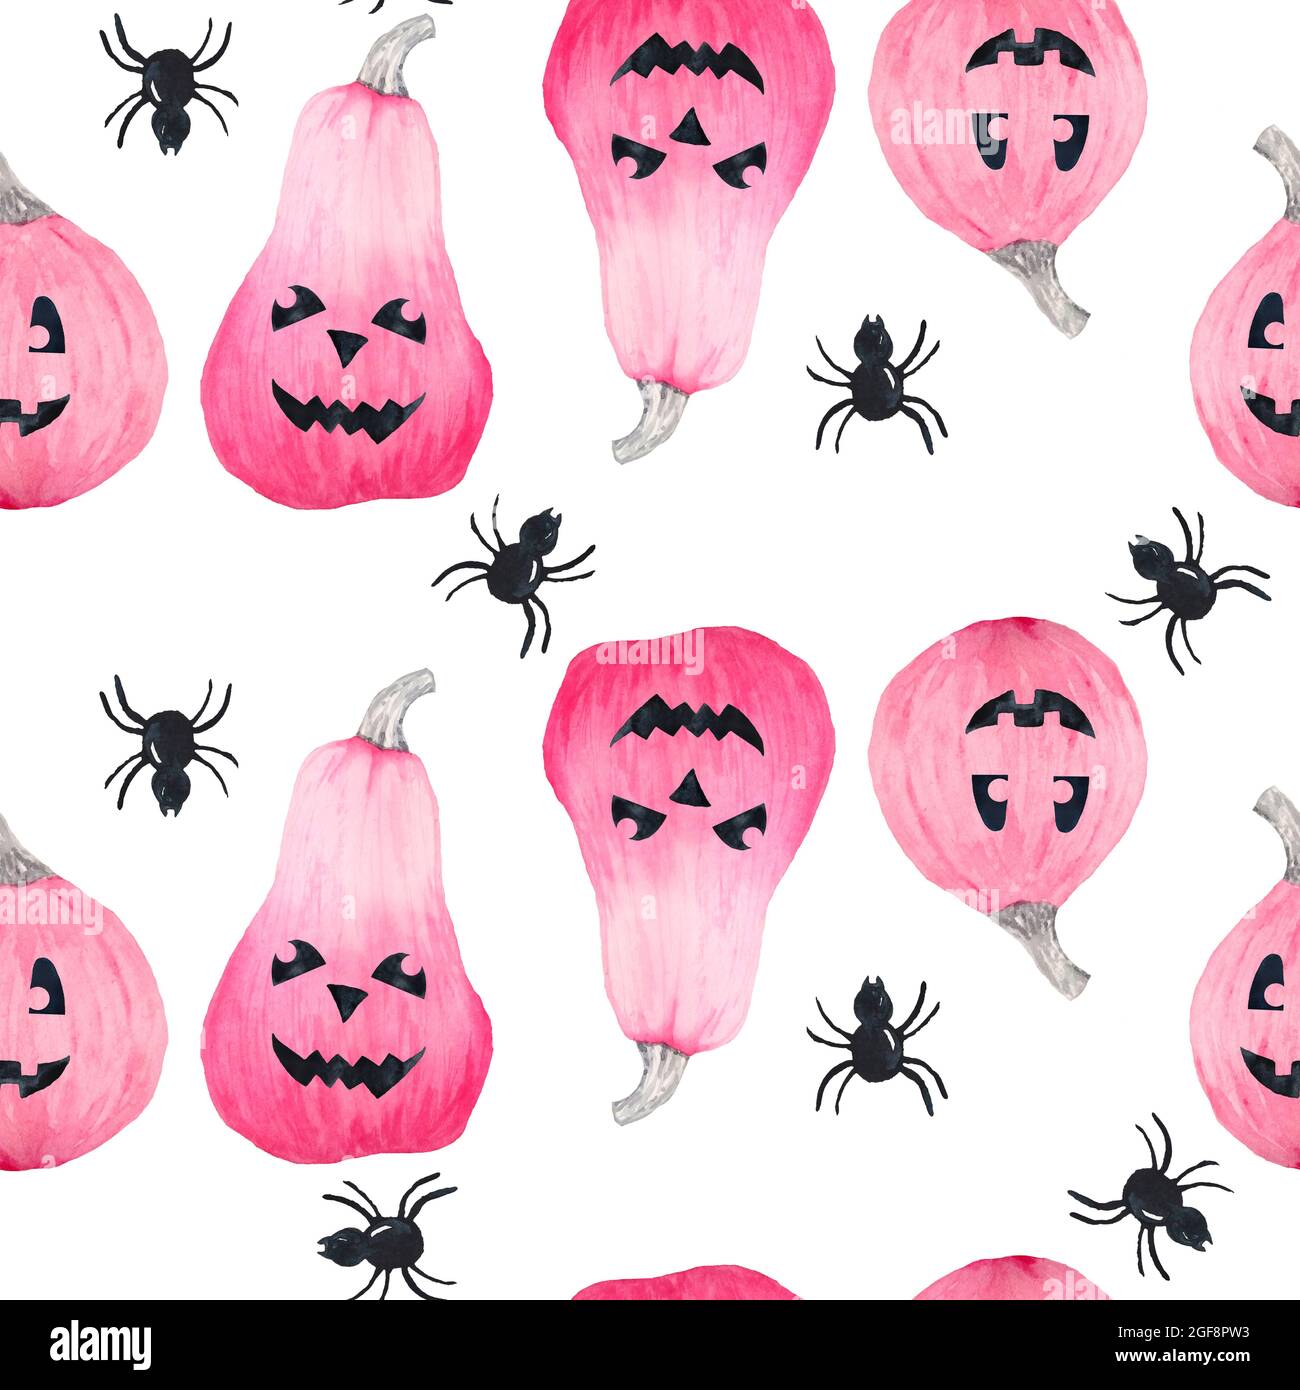 Lucky Lulu Party Shop  Beautiful ombré pink pumpkins to decorate your  home Our kind of Halloween  image fusionmineralpaint  Facebook